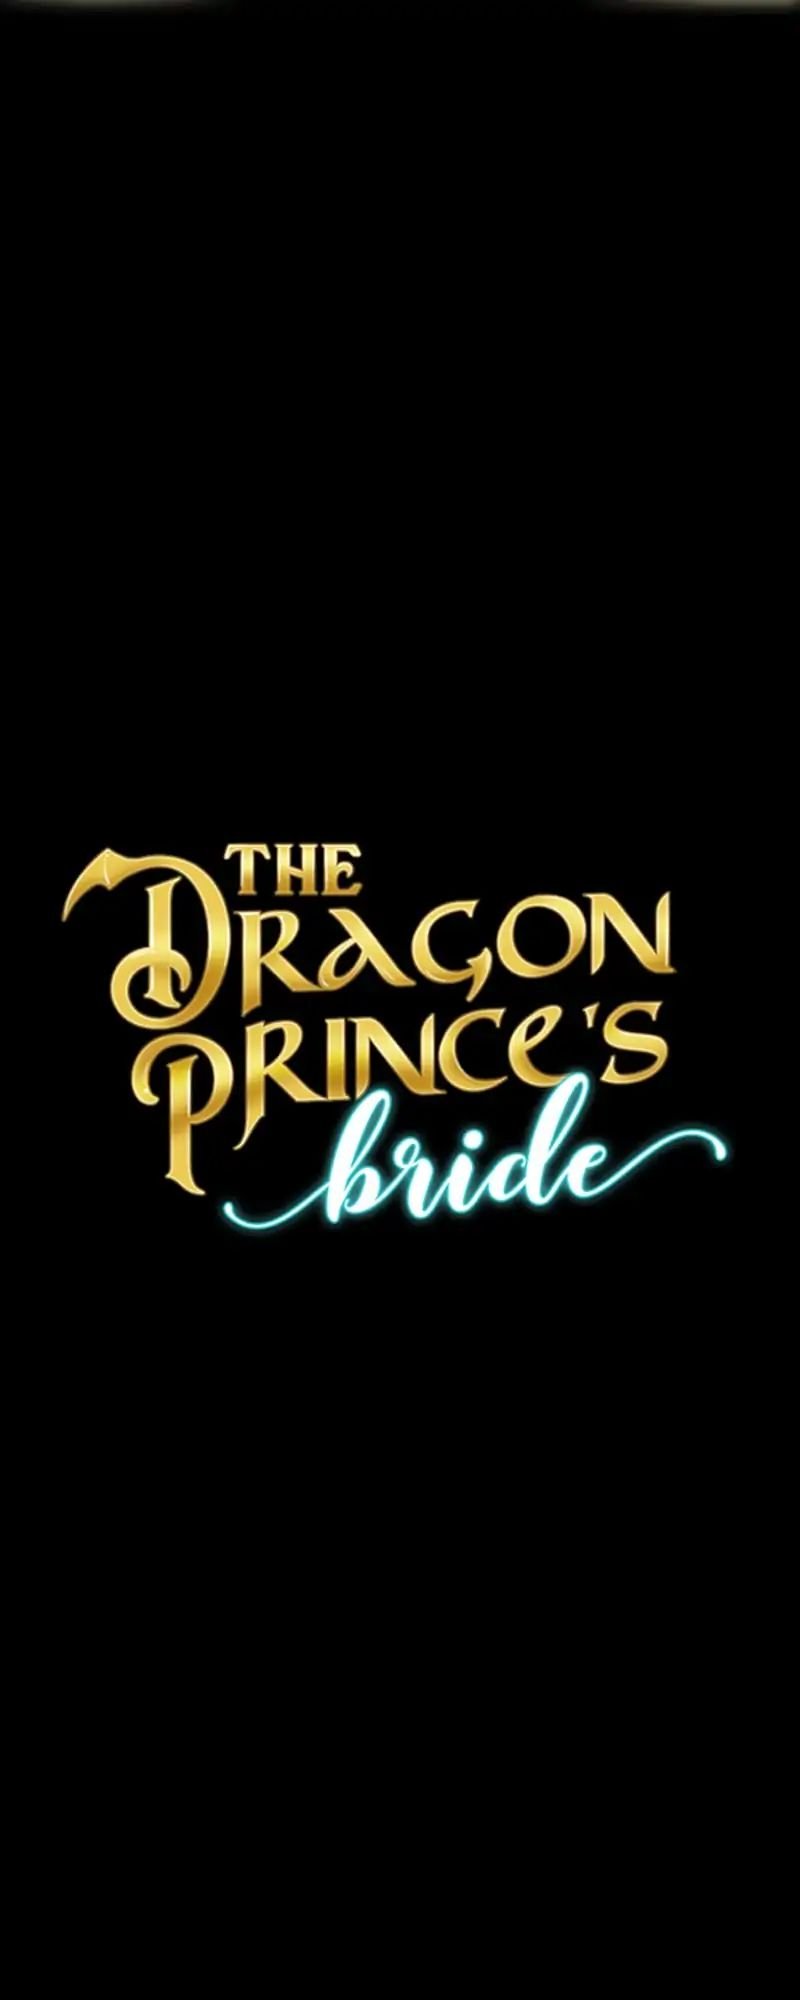 The Dragon Prince’s Bride chapter 3